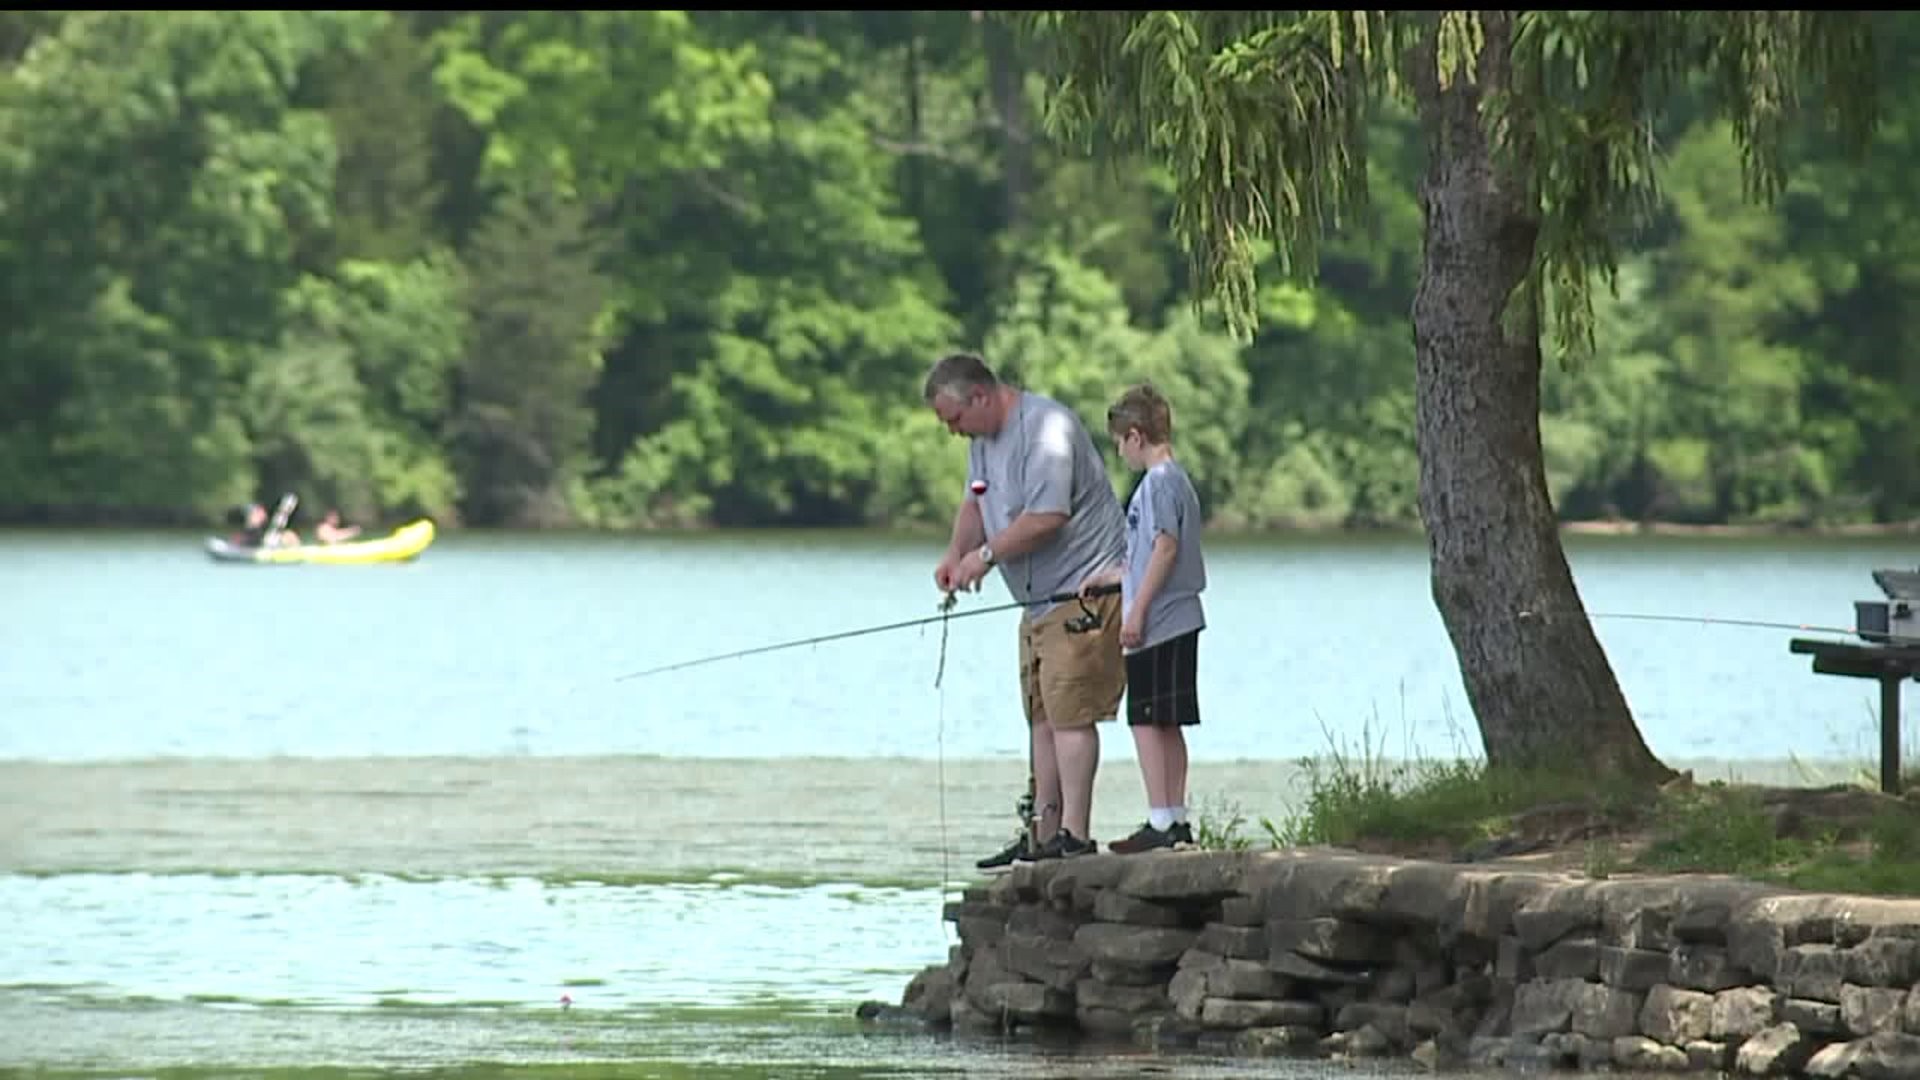 Fish for Free day across the state